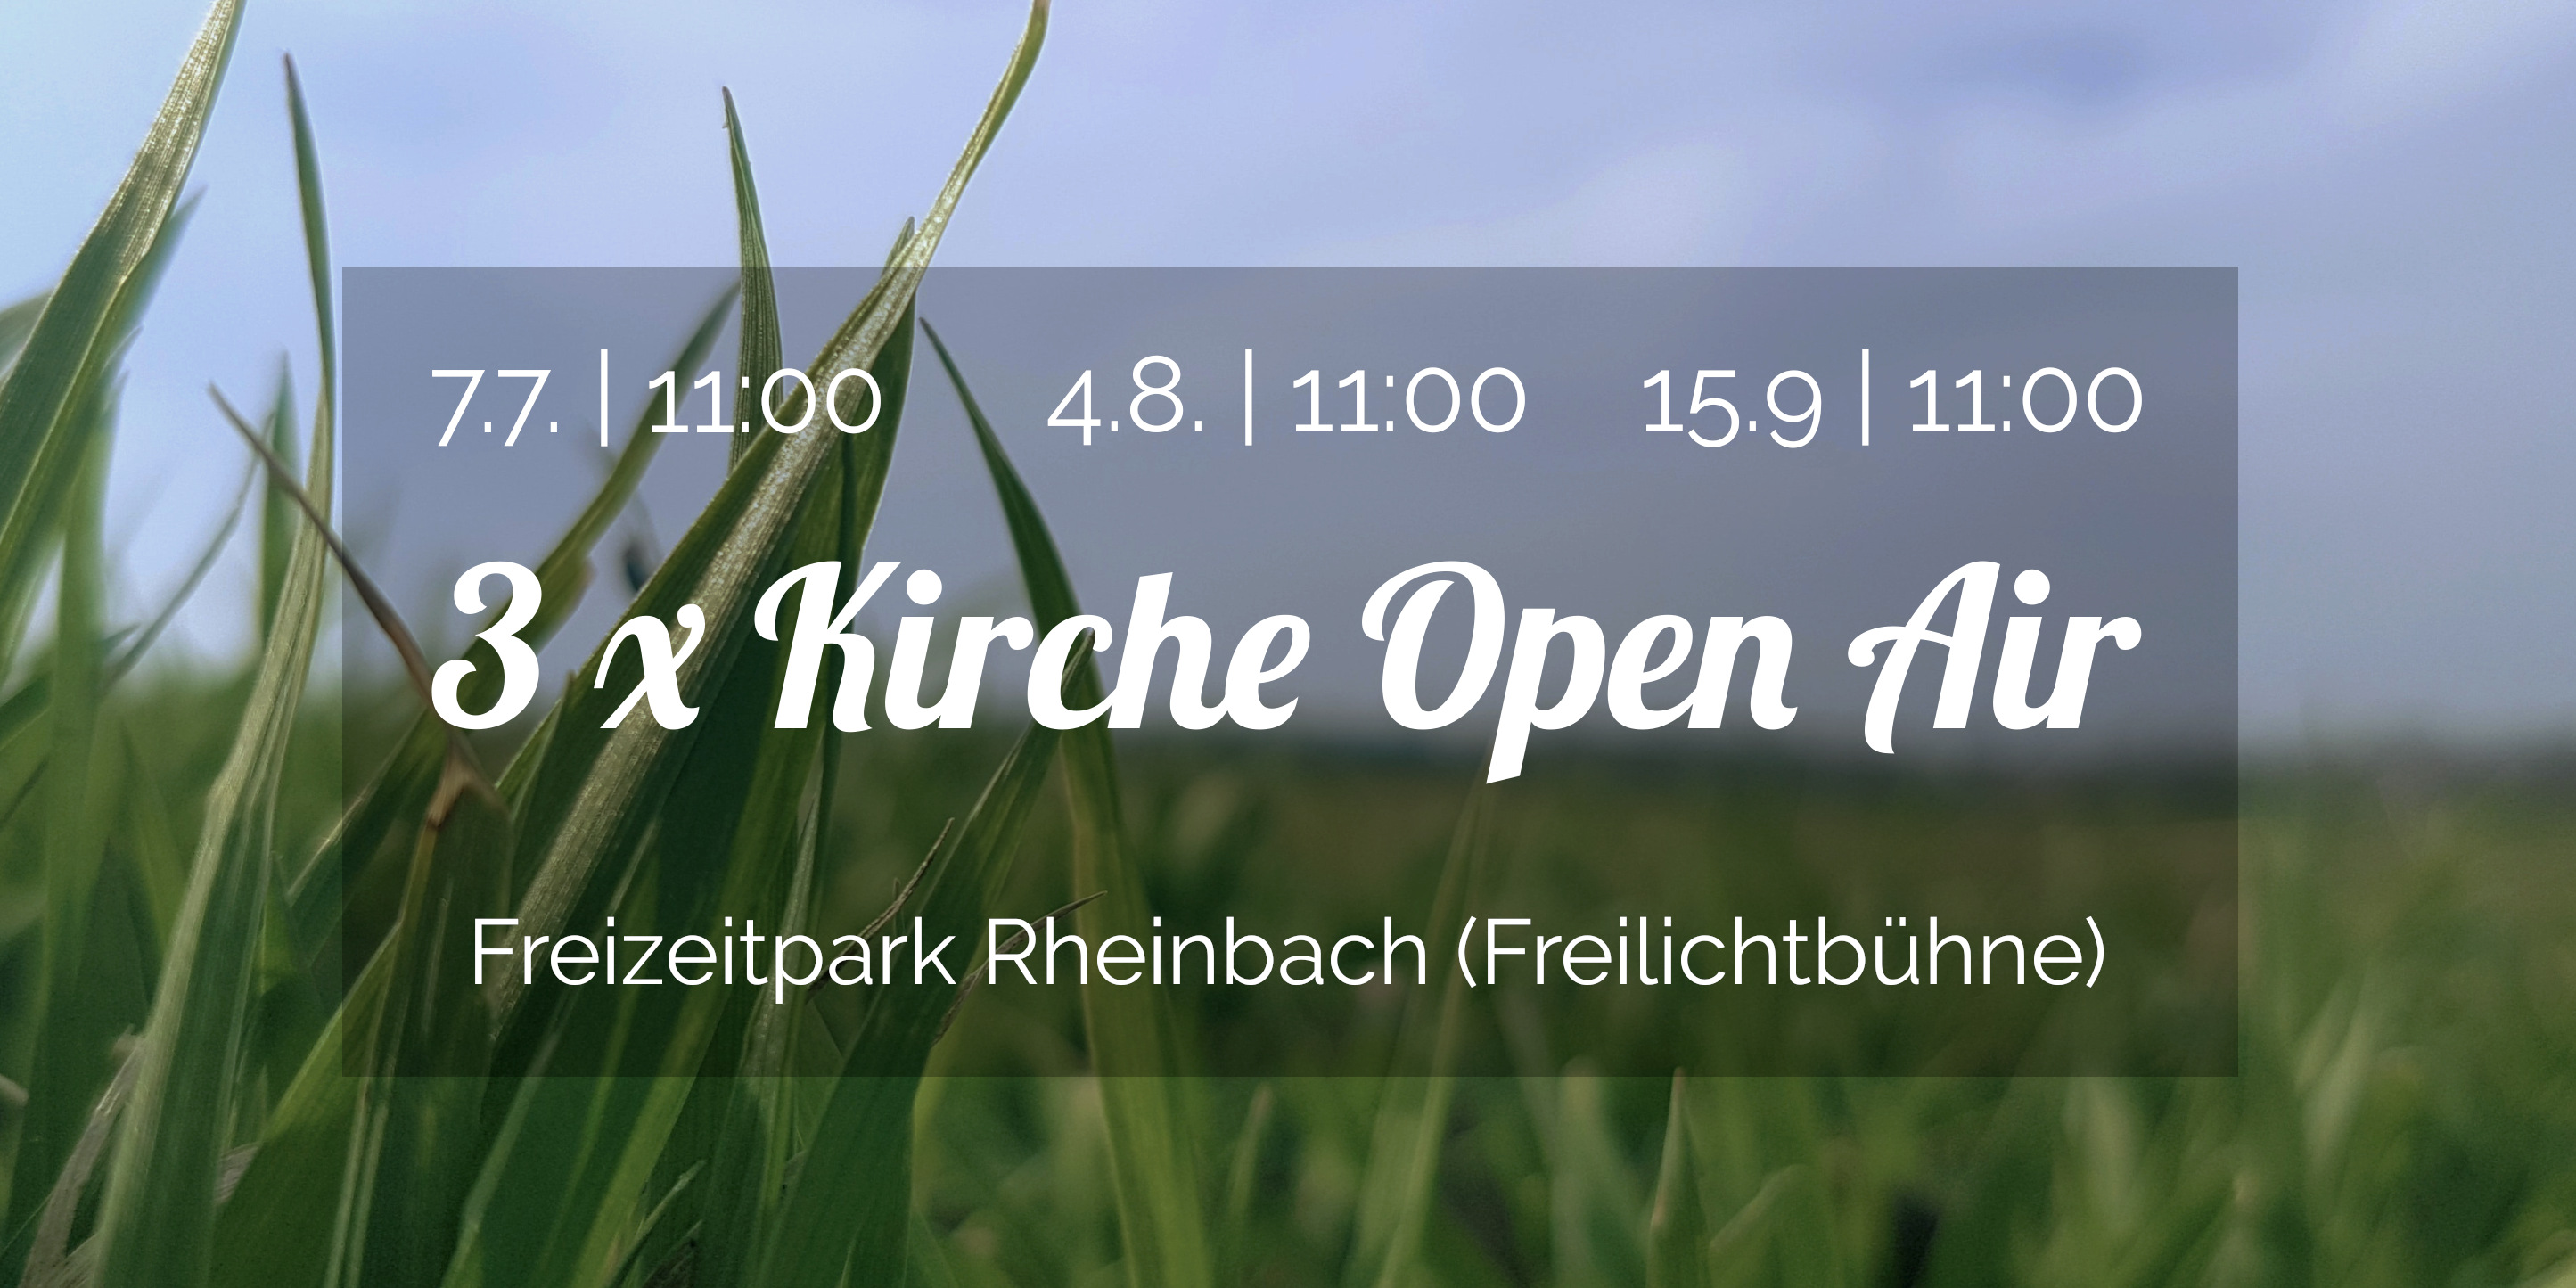 You are currently viewing Kirche Open Air